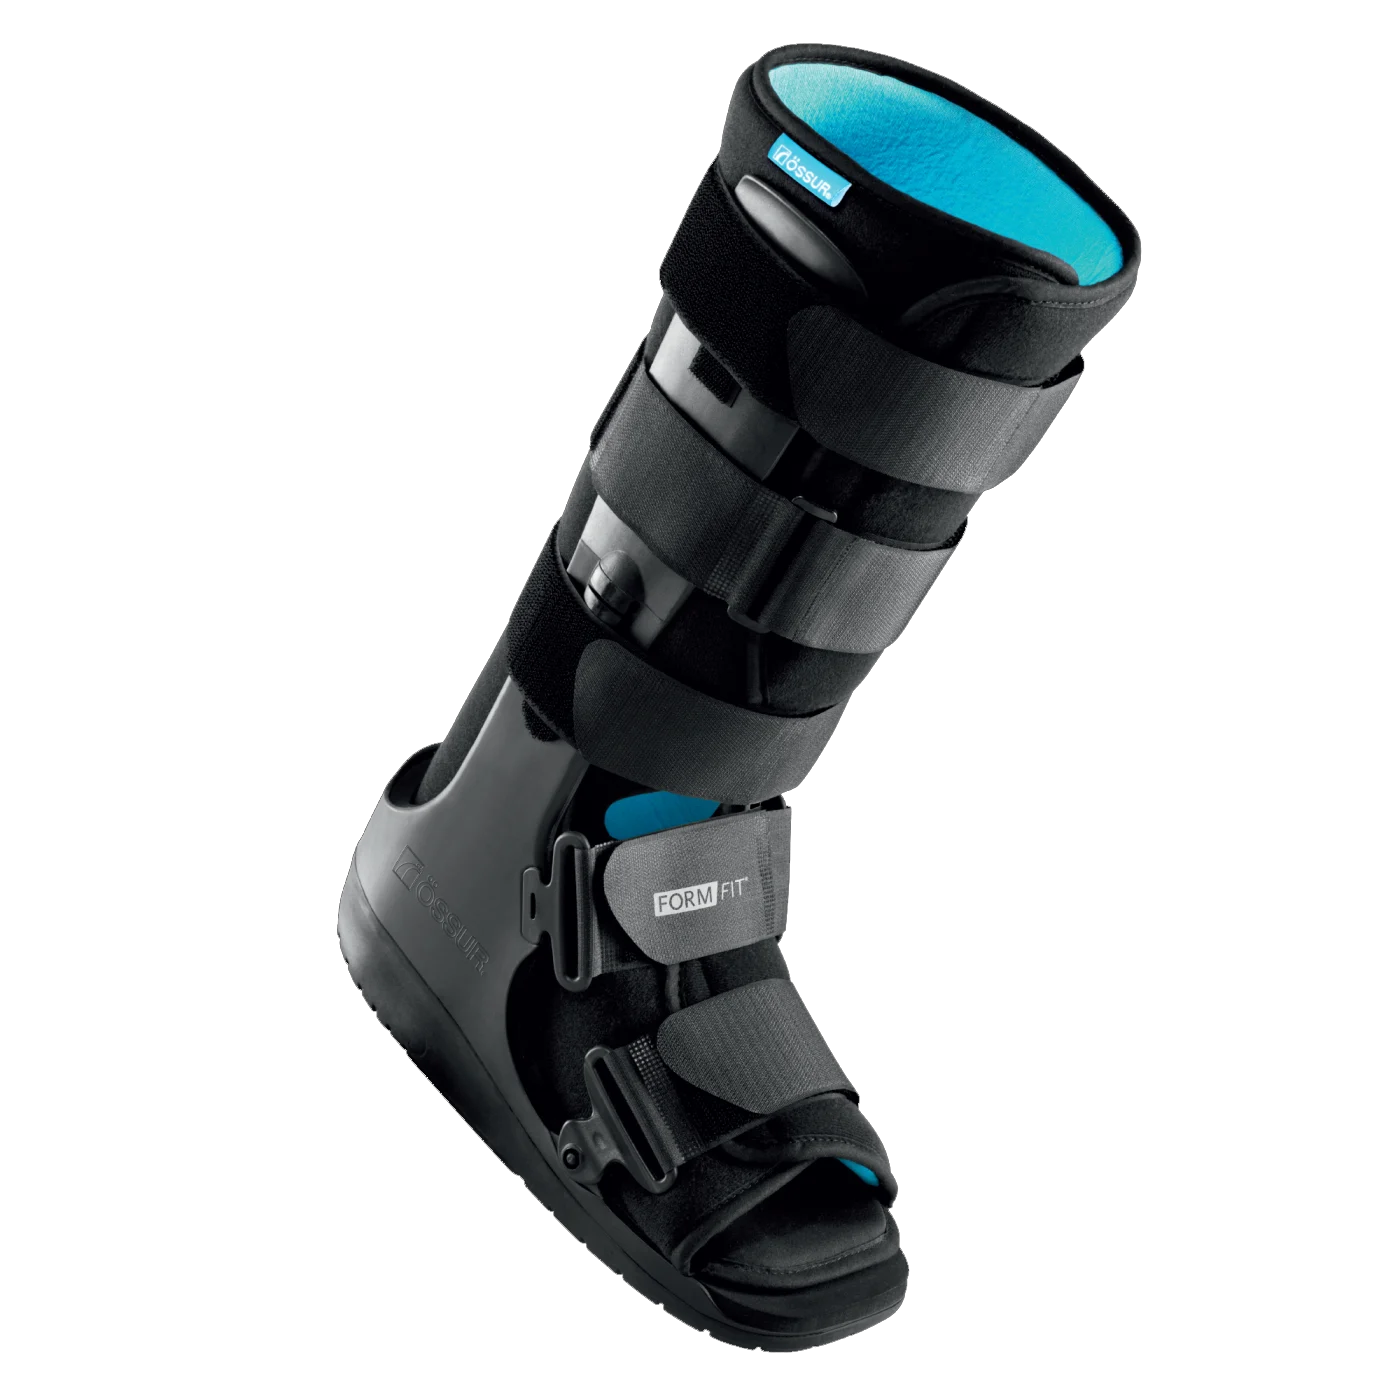 Browse Foot Braces and Products - Elite Medical Supply - Medicare Covered Bracing